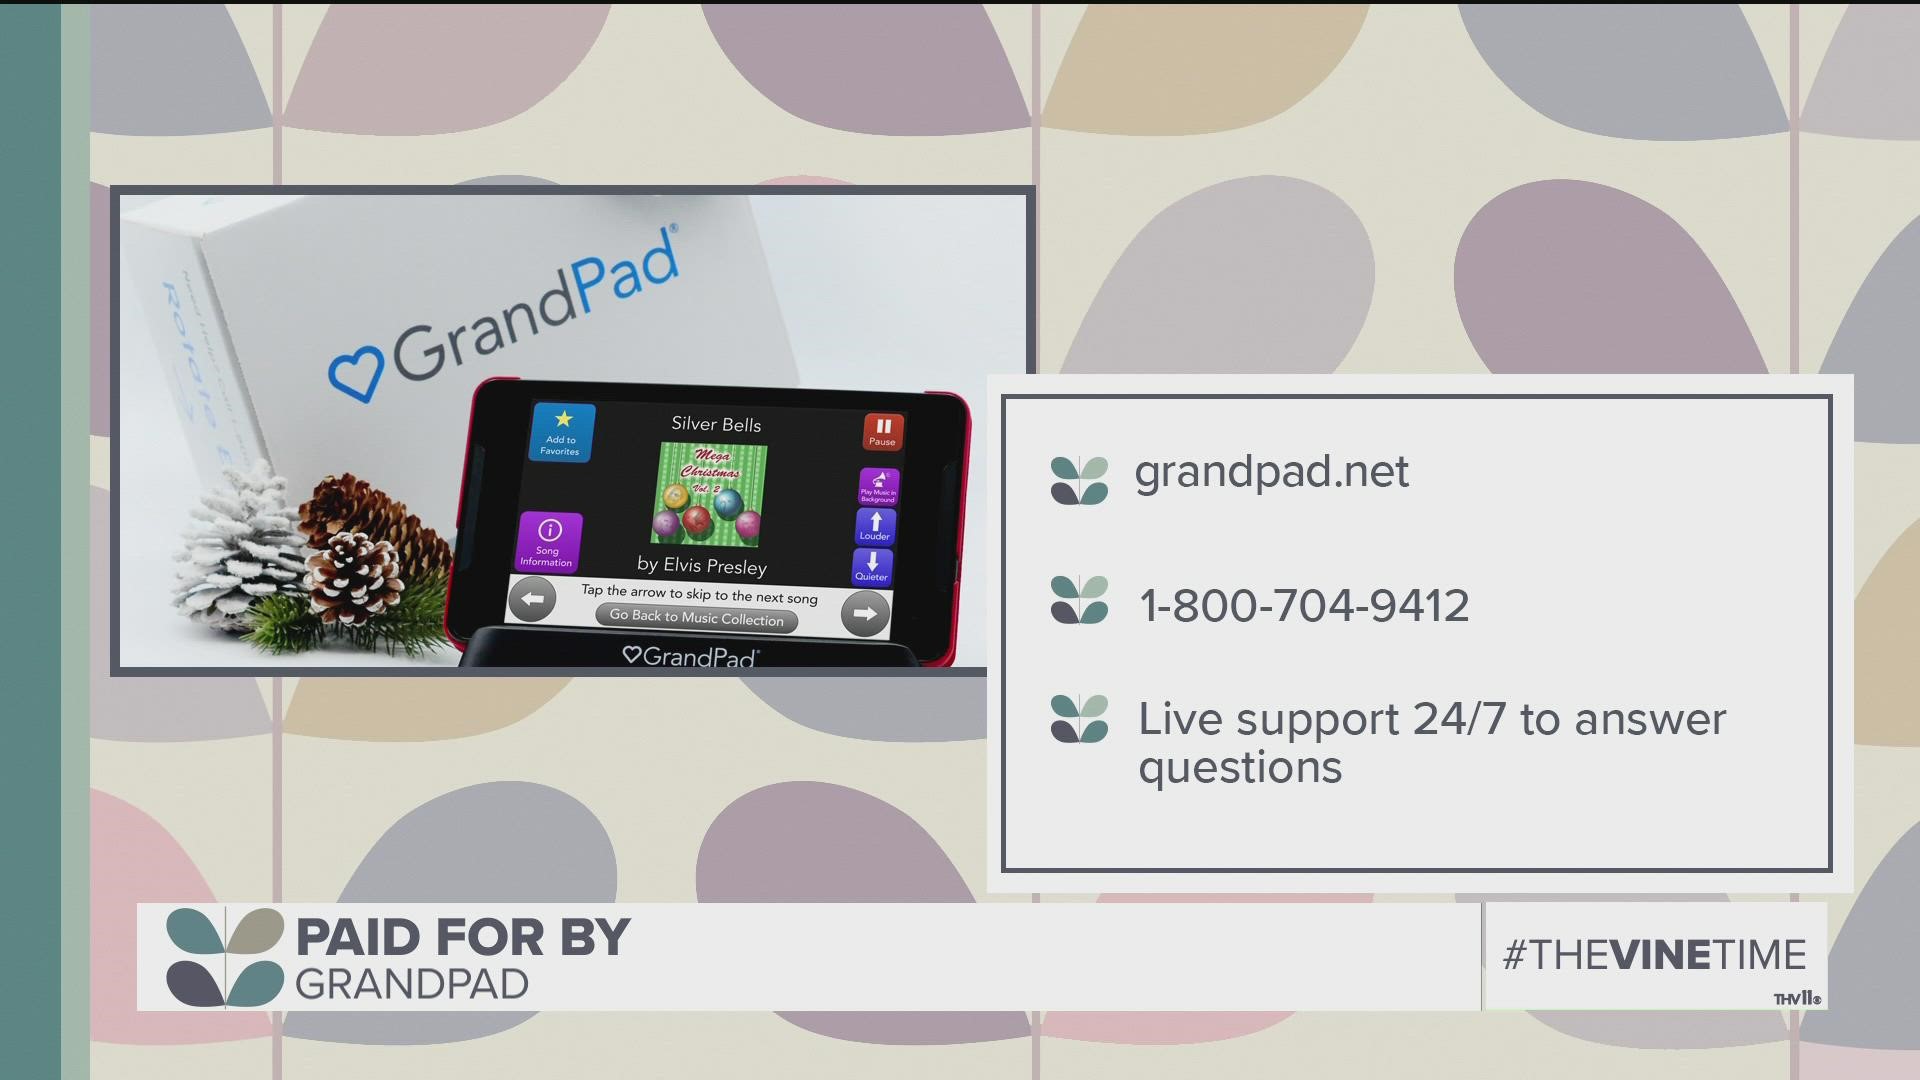 GrandPad is the perfect gift for grandparents 75+ who might find technology overwhelming but still want to text and Skype with grandkids.